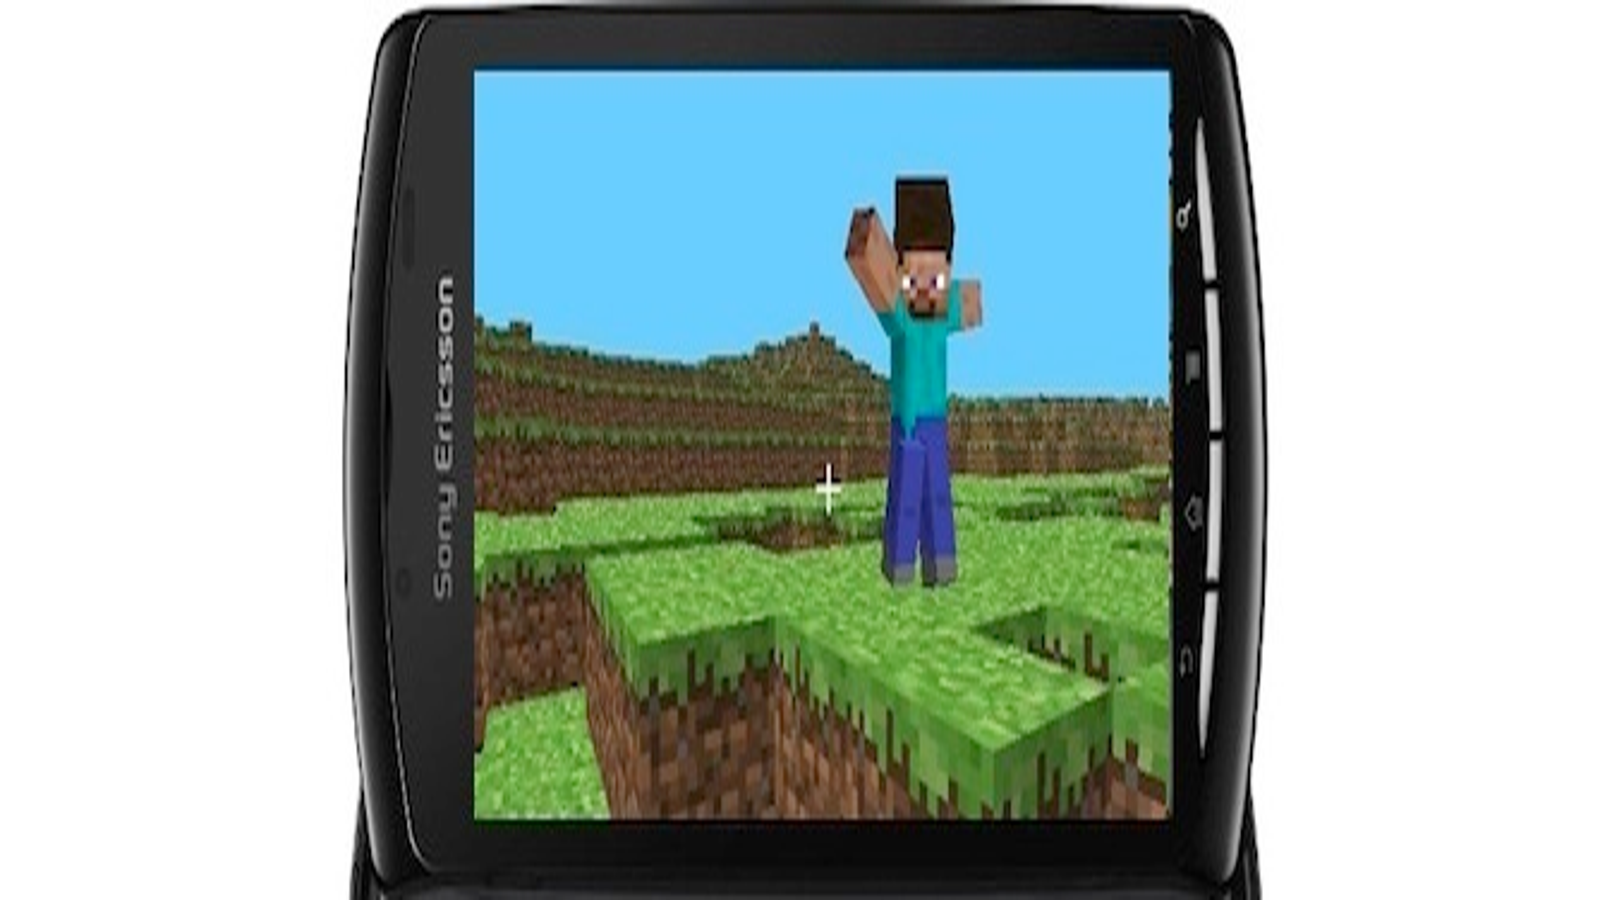 Portable Minecraft Digs Into Xperia Play Android Phone in 2023  Minecraft  pocket edition, Pocket edition, How to play minecraft